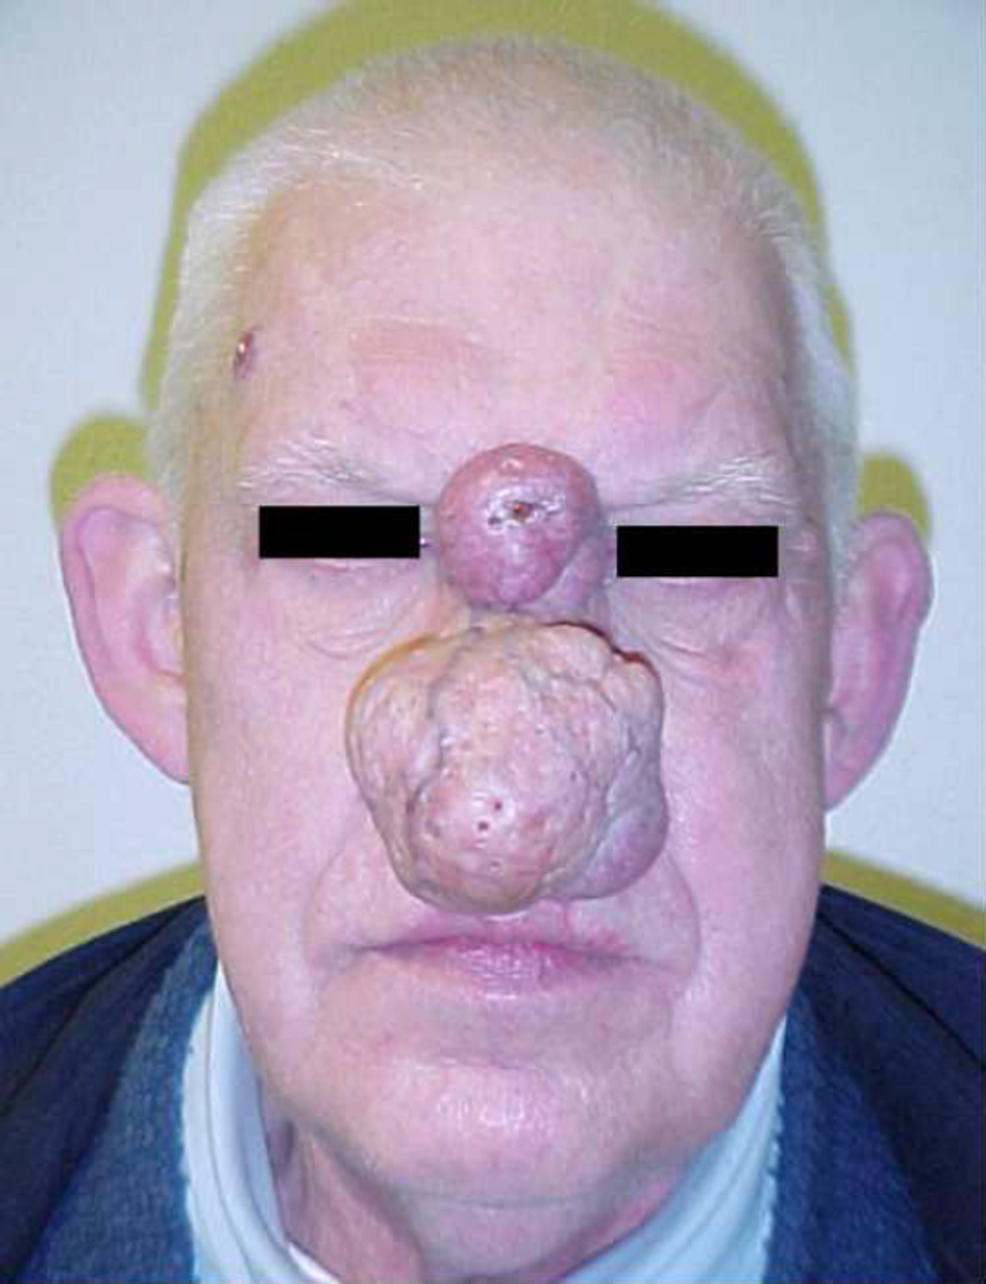 Frontal-preoperative-appearance